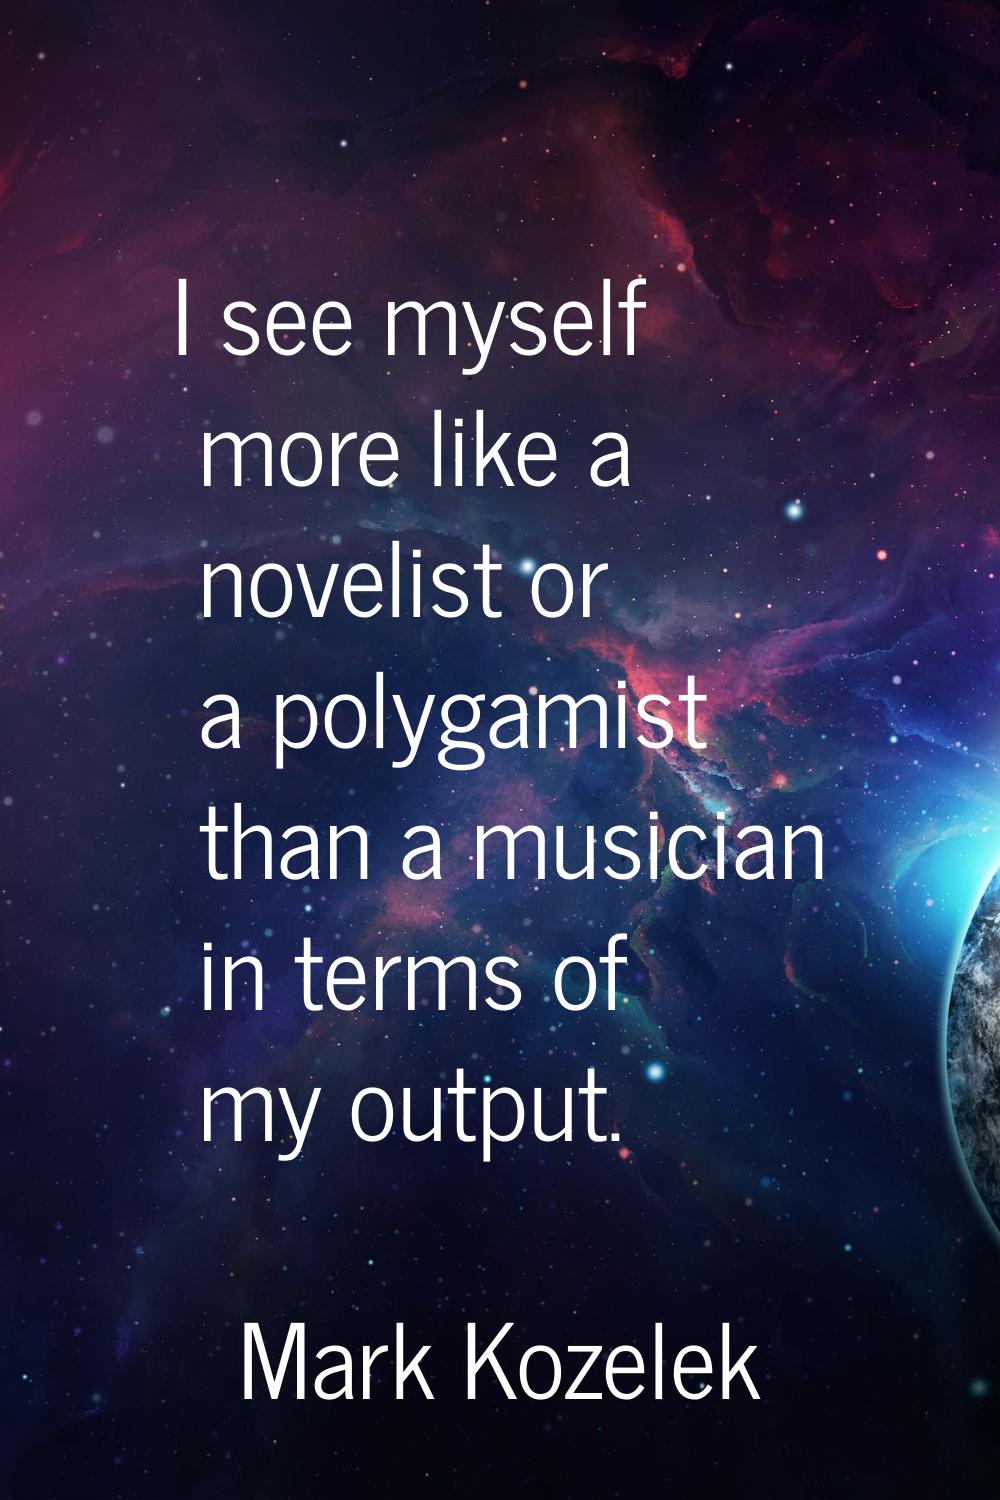 I see myself more like a novelist or a polygamist than a musician in terms of my output.